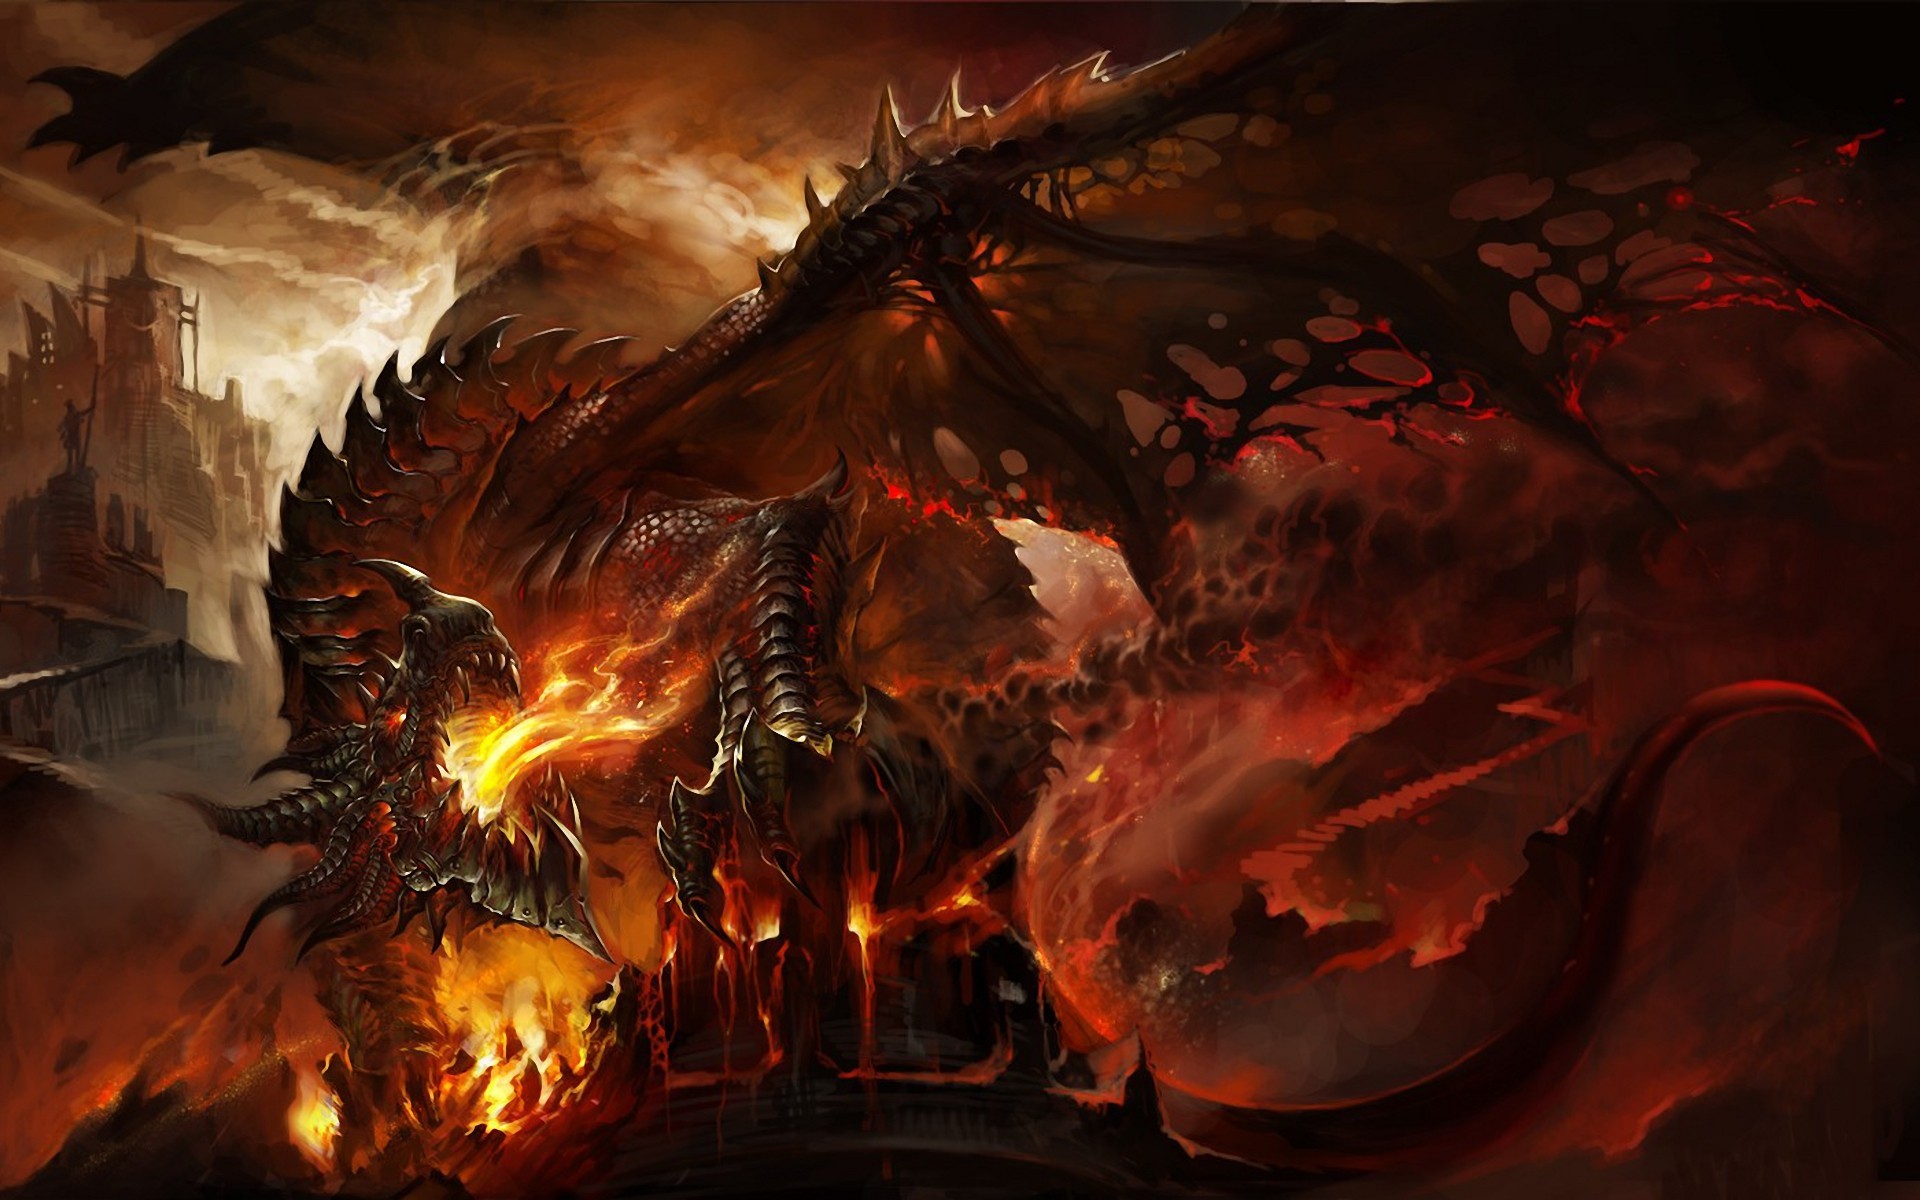 1920x1200 Abstract Dragons Fire Fantasy Art Deathwing Artwork World Of Warcraft  Cataclysm Wallpaper At 3d Wallpapers